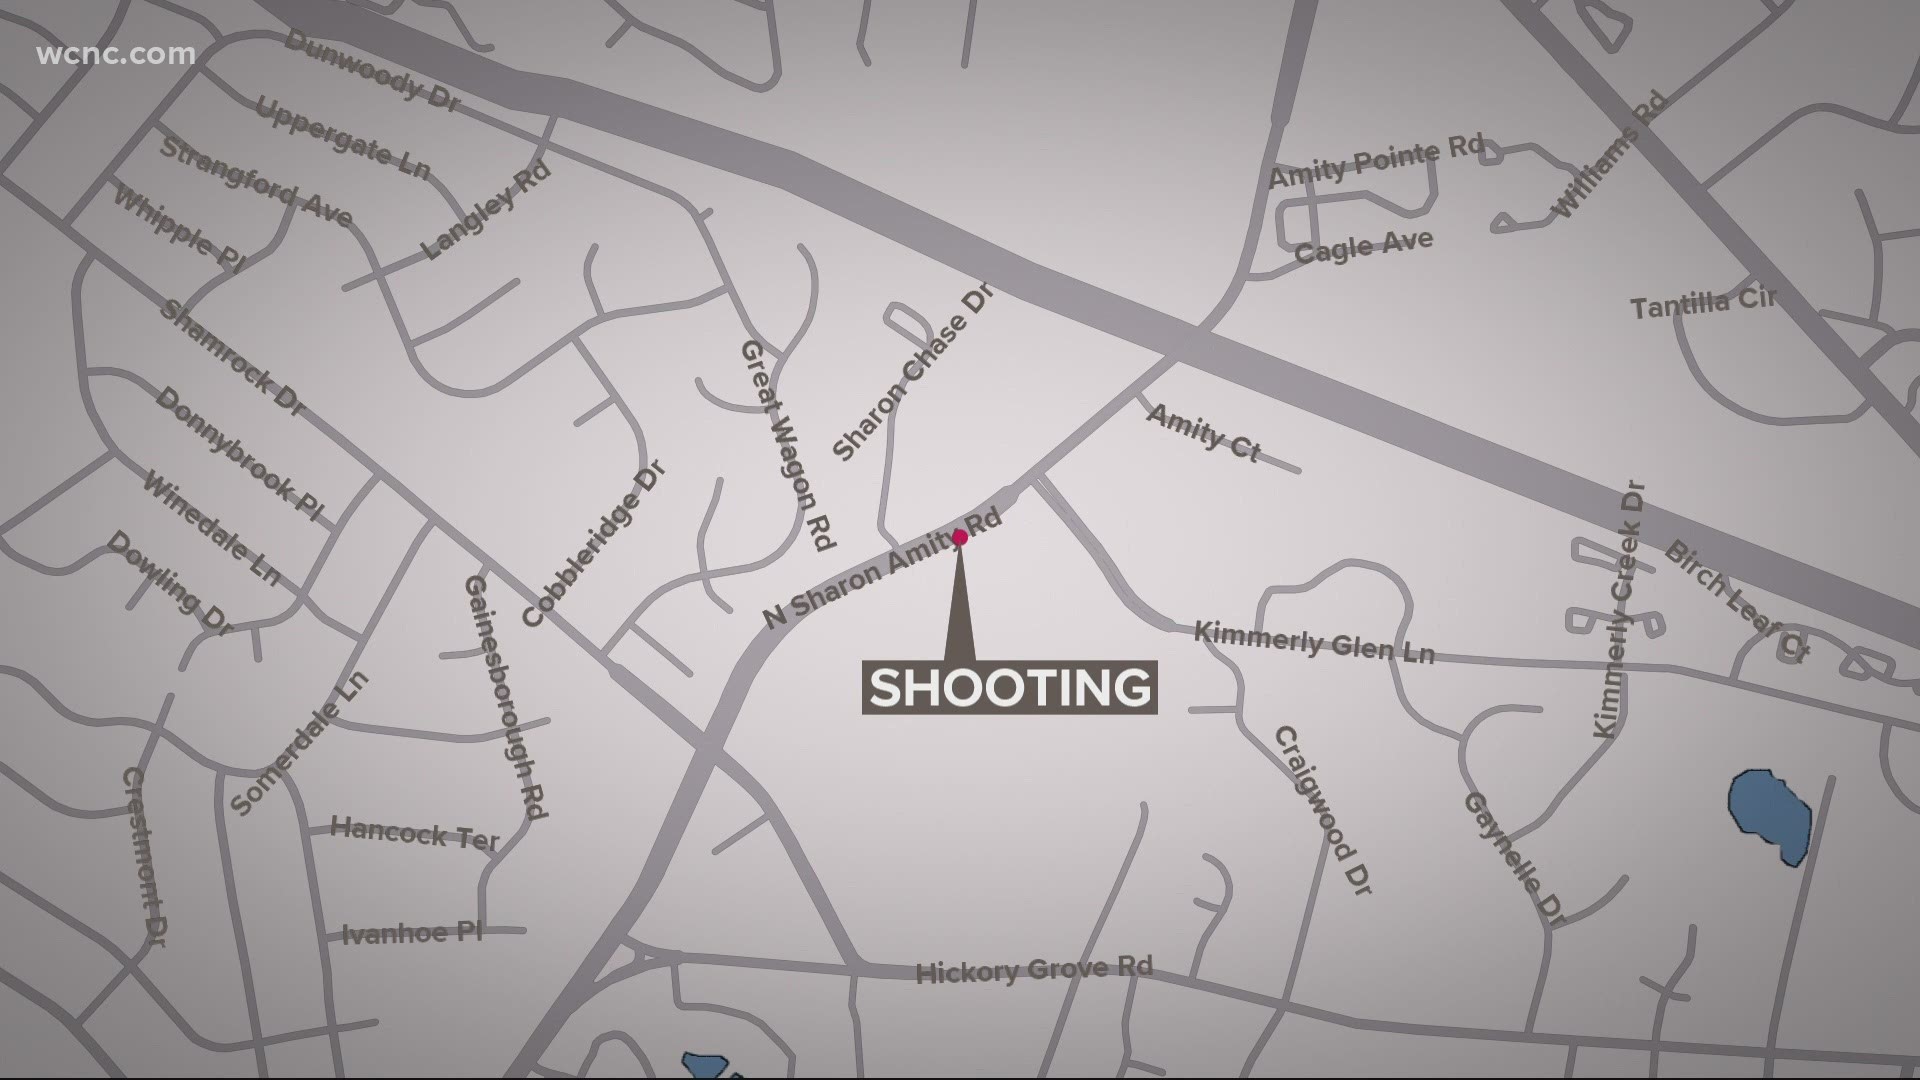 It happened in the Hickory Grove area around 8 p.m. Sunday. One person died due to injuries from a gunshot wound, according to CMPD.